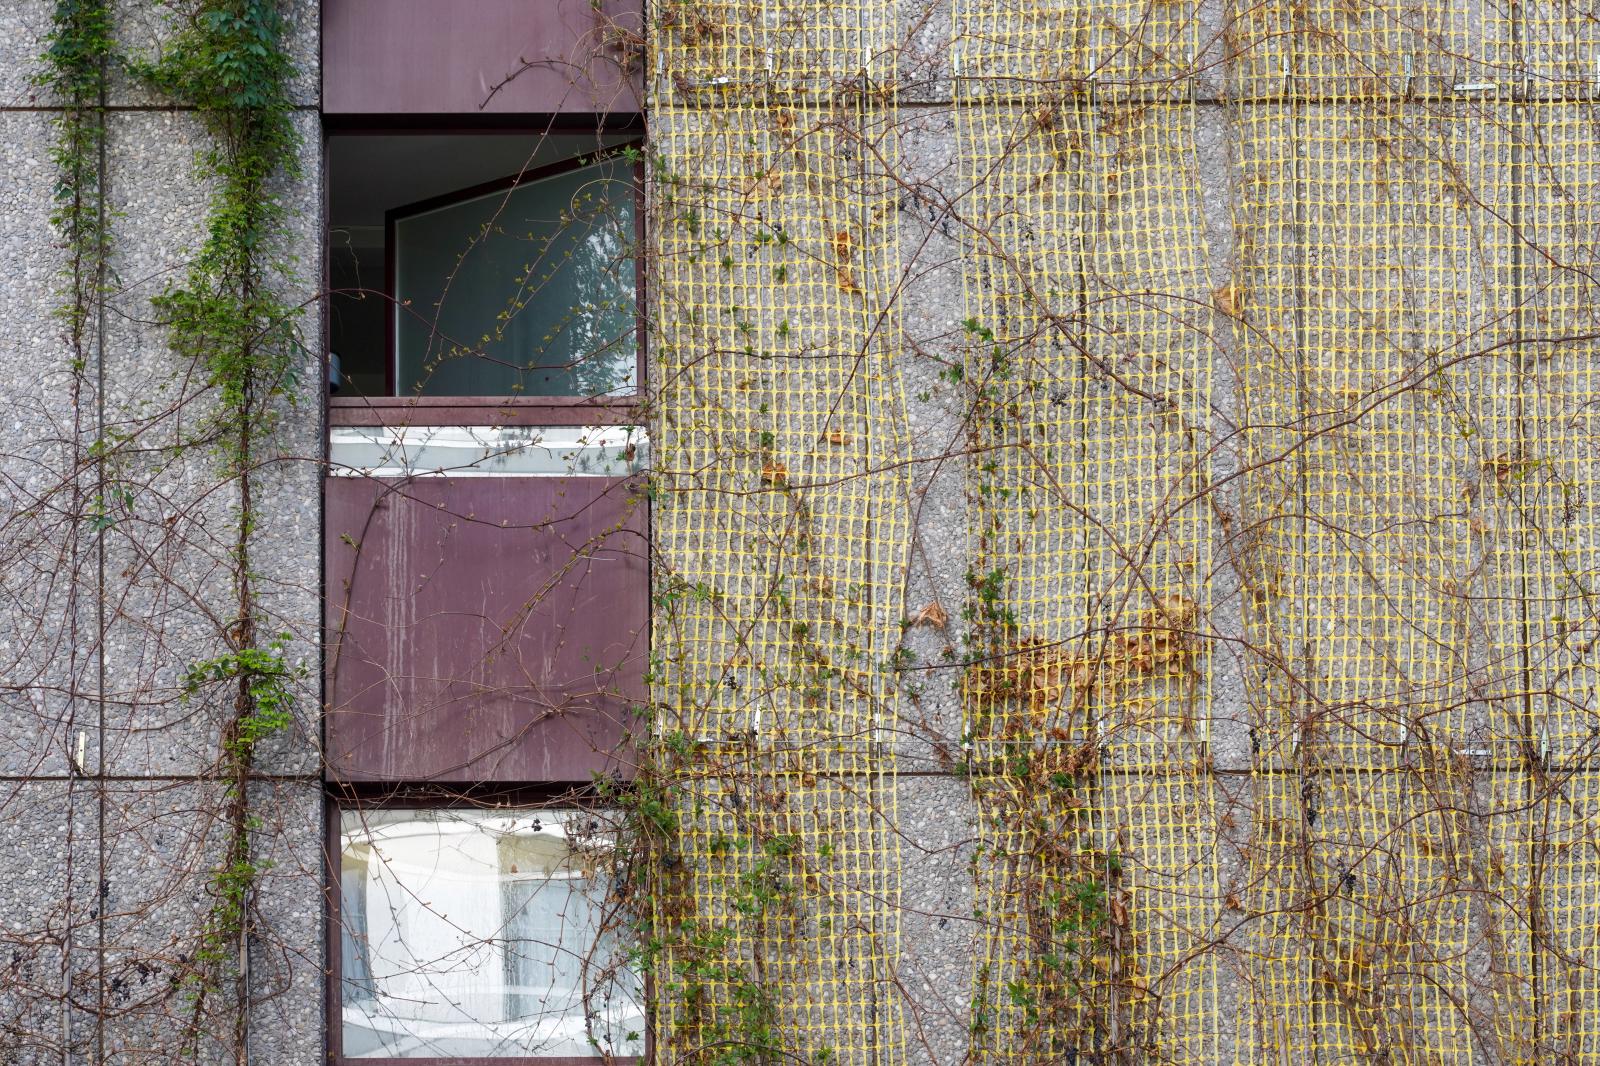 Nature’s Embrace: Where Urban meets Verdant | Buy this image